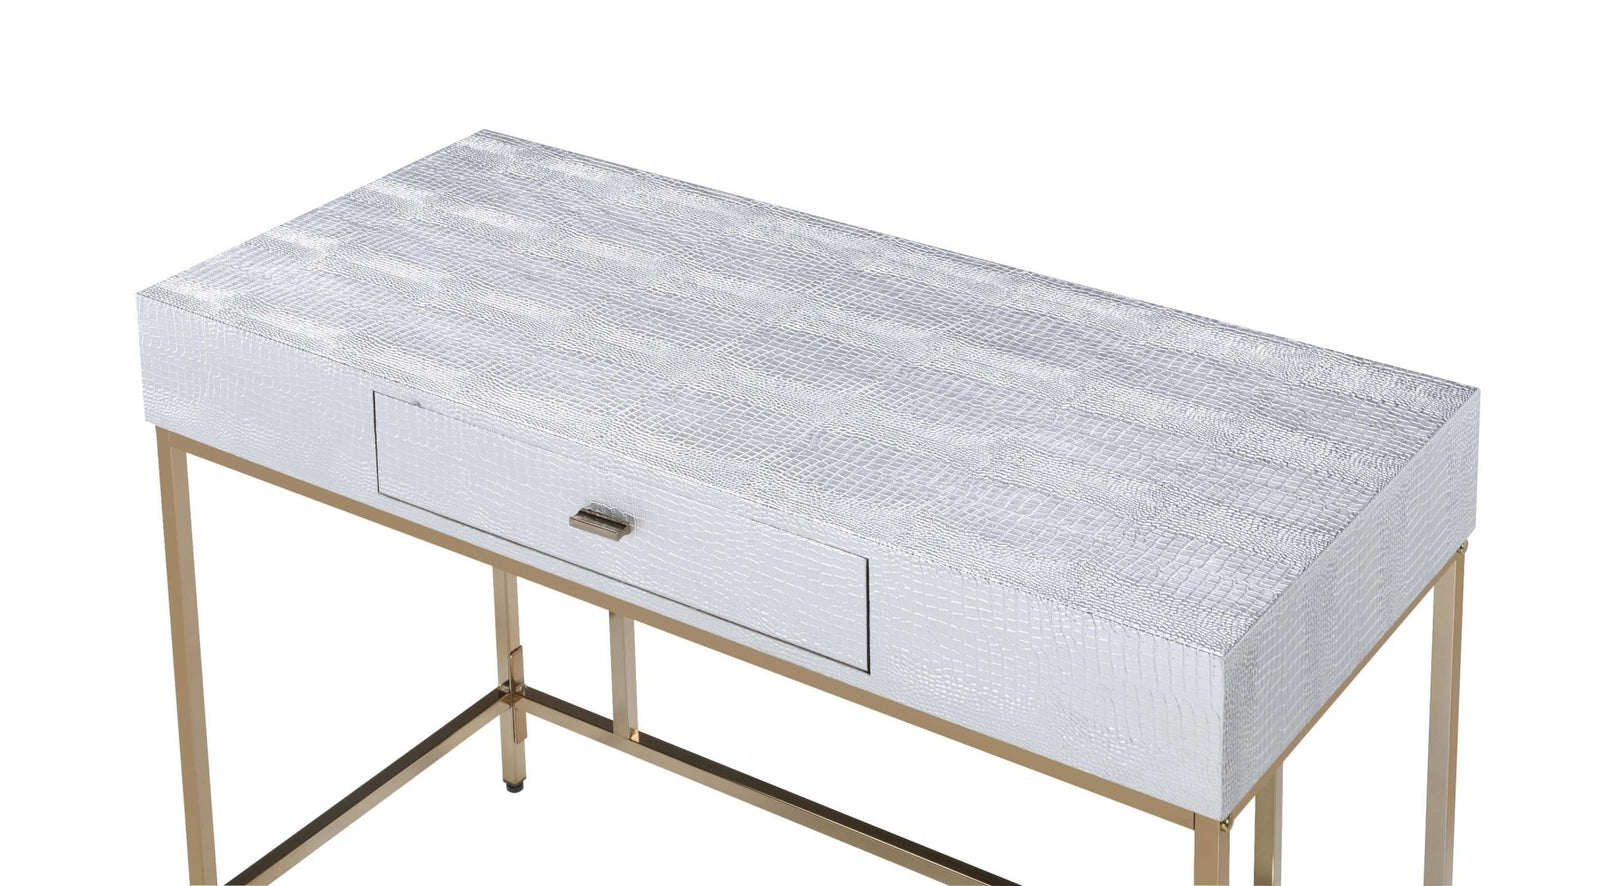 Champagne And Silver Metal Tube Desk 43" X 19" X 32"